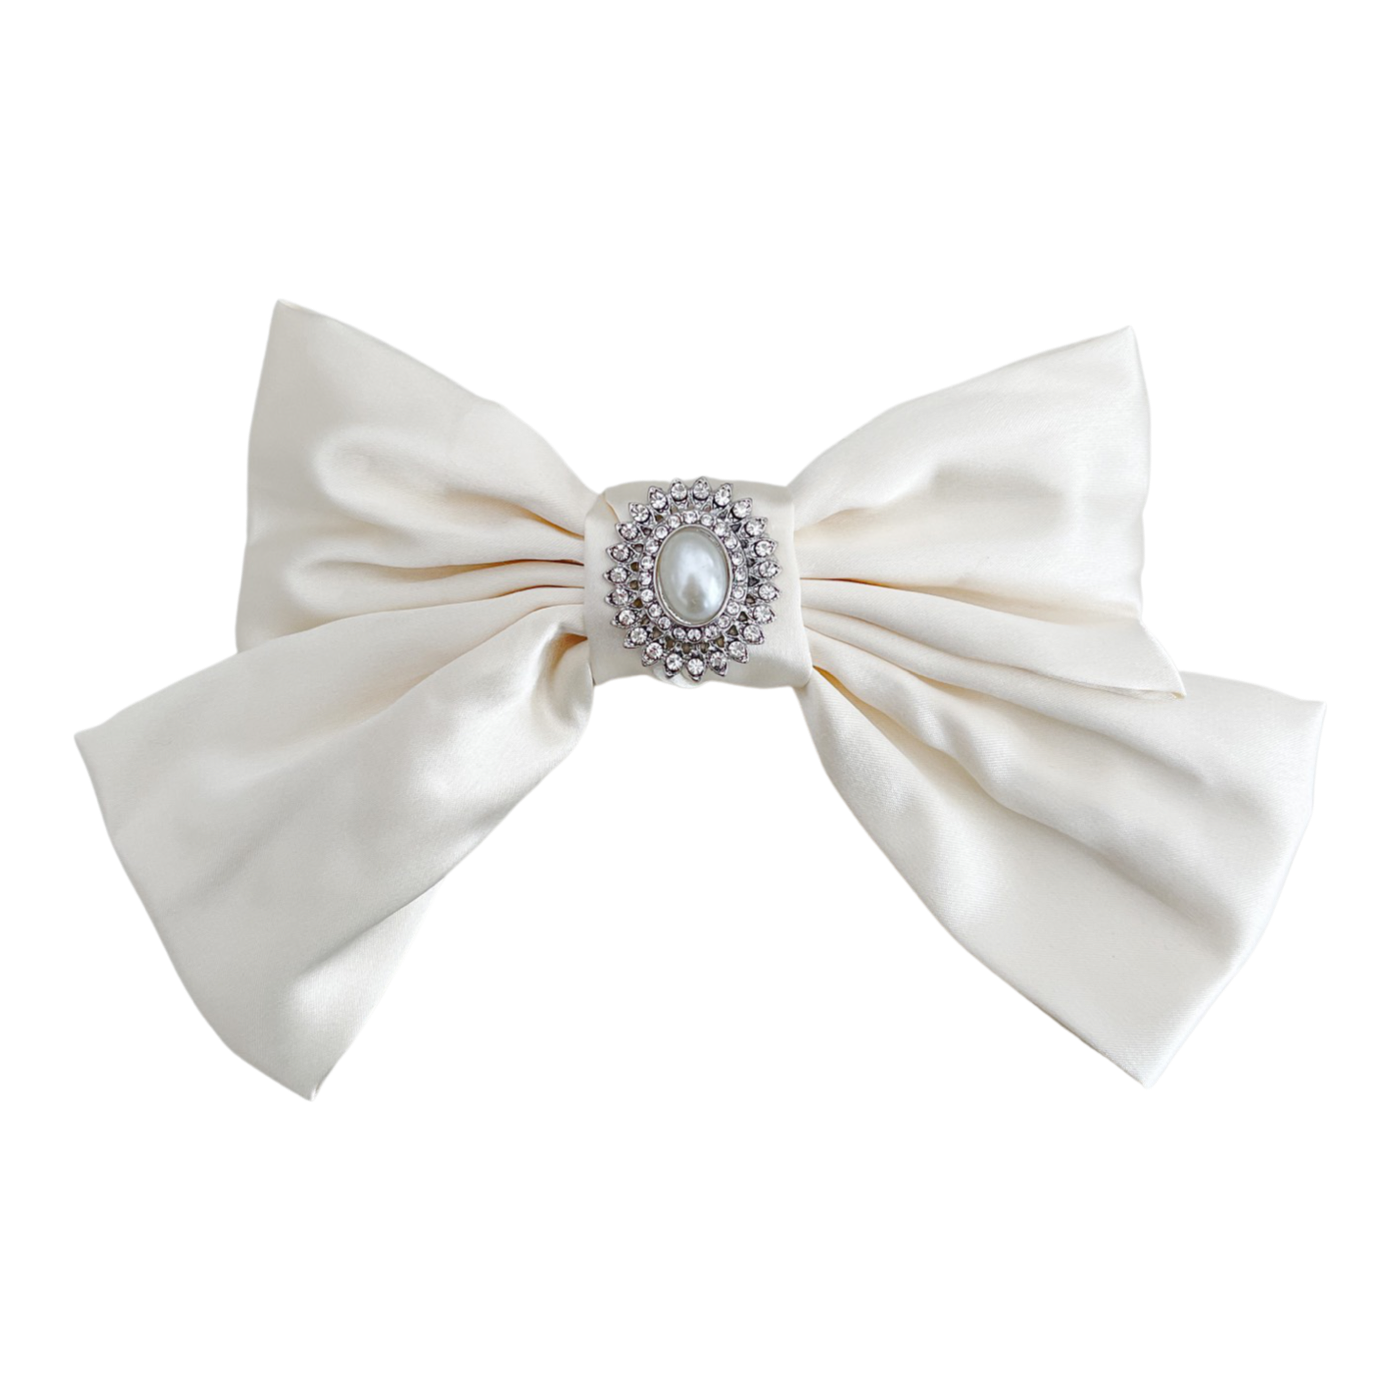 "Art Deco" French Bow